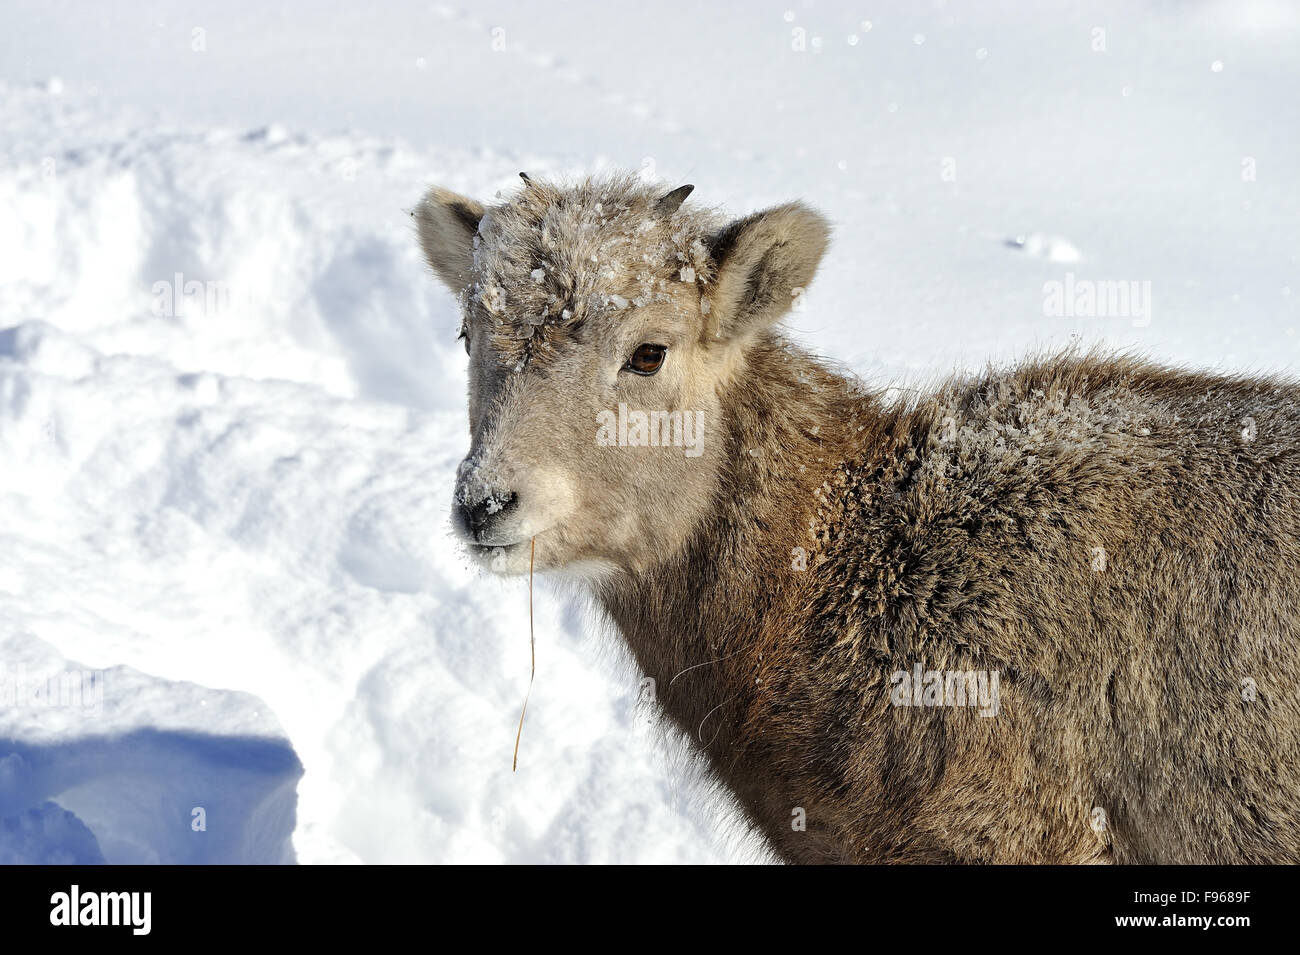 A portrait image of a baby bighorn sheep  Orvis canadensis, foraging in the deep snow in the foothills of the rocky mountains Stock Photo